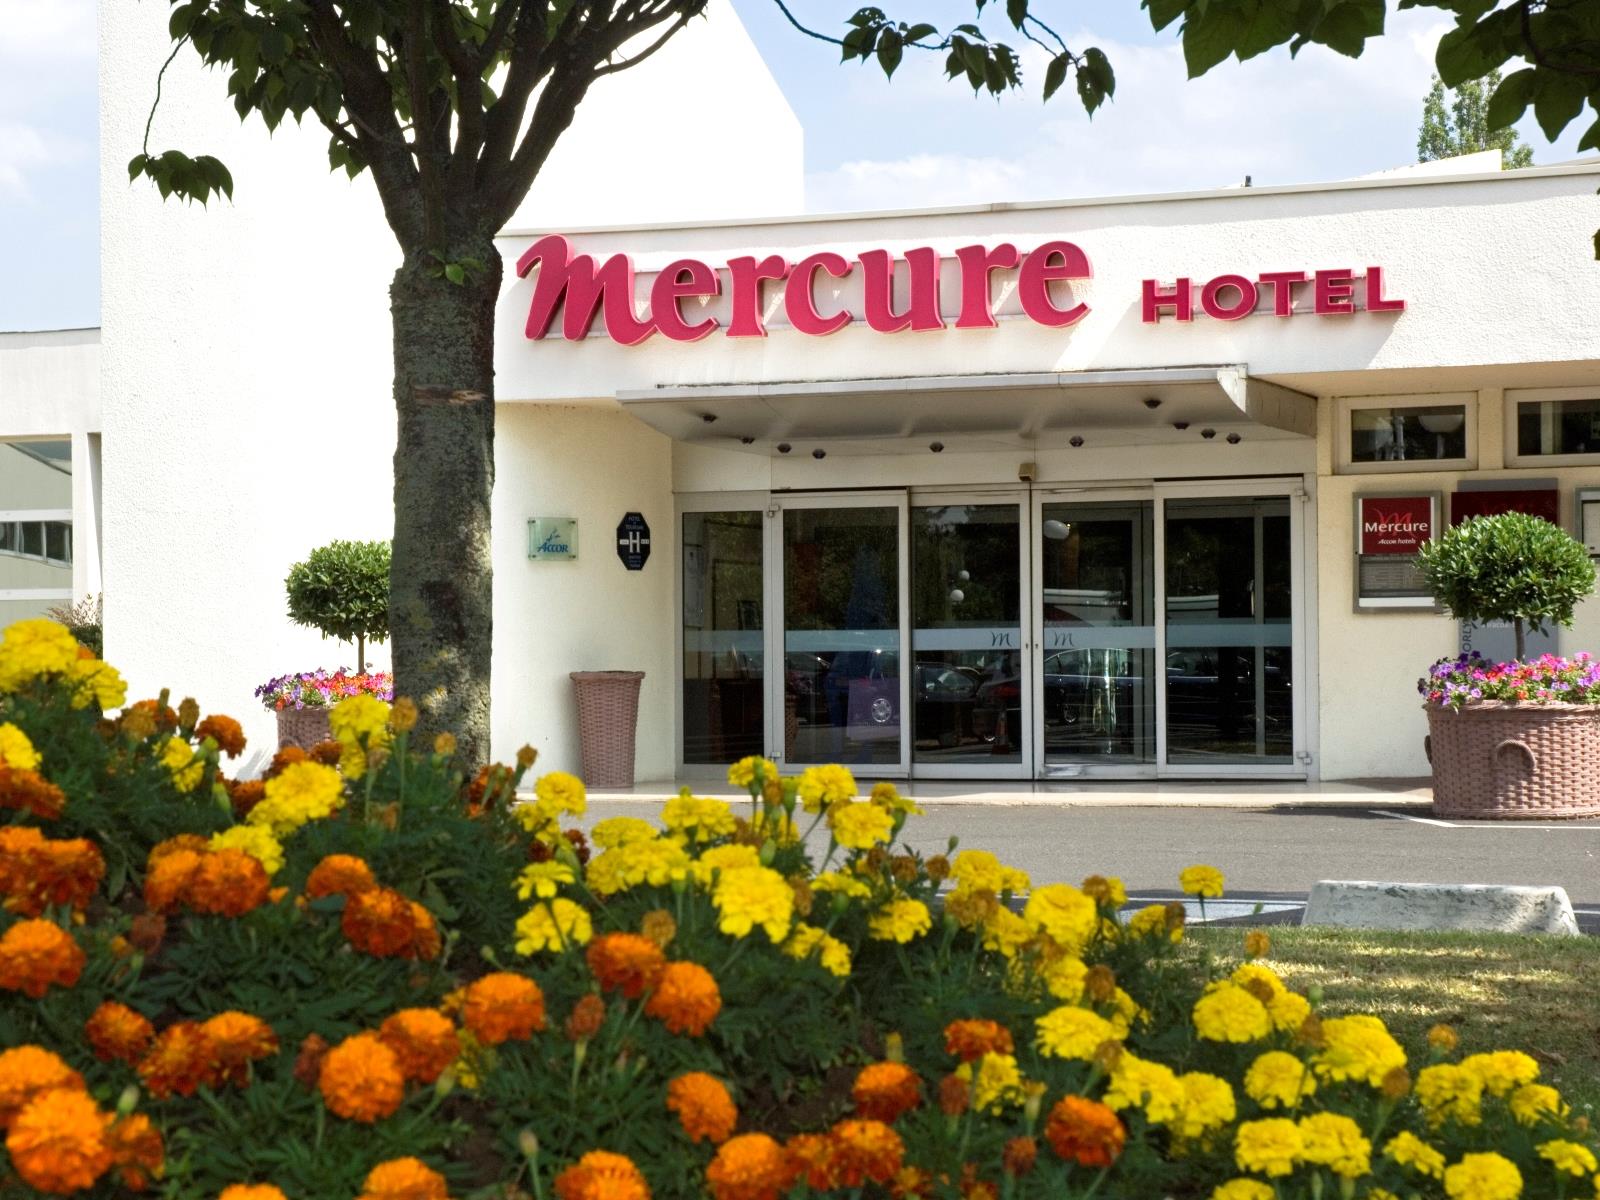 Mercure Orly Aeroport Hotel France FAQ 2017, What facilities are there in Mercure Orly Aeroport Hotel France 2017, What Languages Spoken are Supported in Mercure Orly Aeroport Hotel France 2017, Which payment cards are accepted in Mercure Orly Aeroport Hotel France , France Mercure Orly Aeroport Hotel room facilities and services Q&A 2017, France Mercure Orly Aeroport Hotel online booking services 2017, France Mercure Orly Aeroport Hotel address 2017, France Mercure Orly Aeroport Hotel telephone number 2017,France Mercure Orly Aeroport Hotel map 2017, France Mercure Orly Aeroport Hotel traffic guide 2017, how to go France Mercure Orly Aeroport Hotel, France Mercure Orly Aeroport Hotel booking online 2017, France Mercure Orly Aeroport Hotel room types 2017.